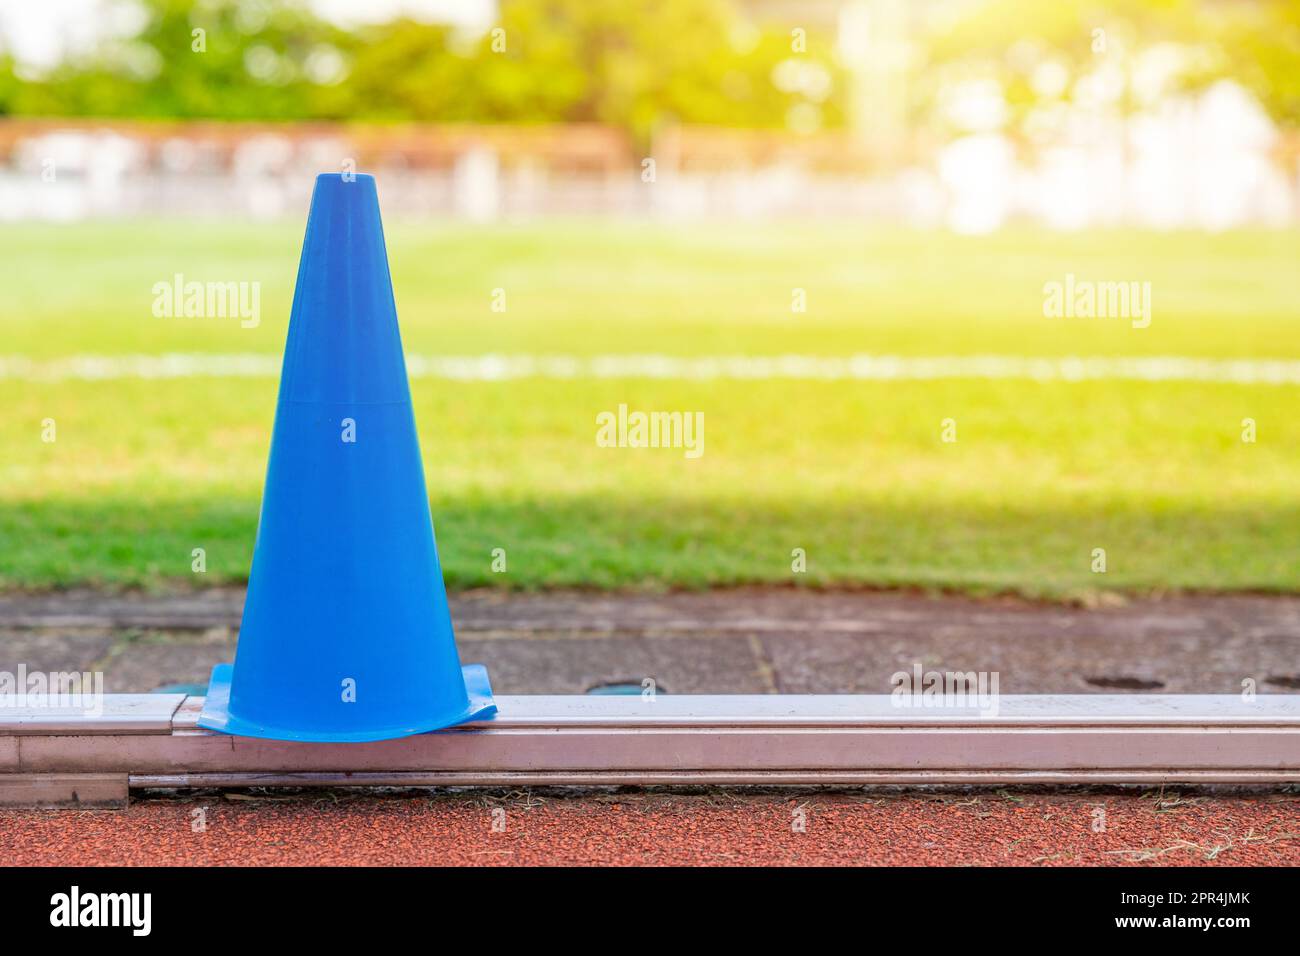 football grass field running track and training cone for sport exercise outdoors activity background Stock Photo